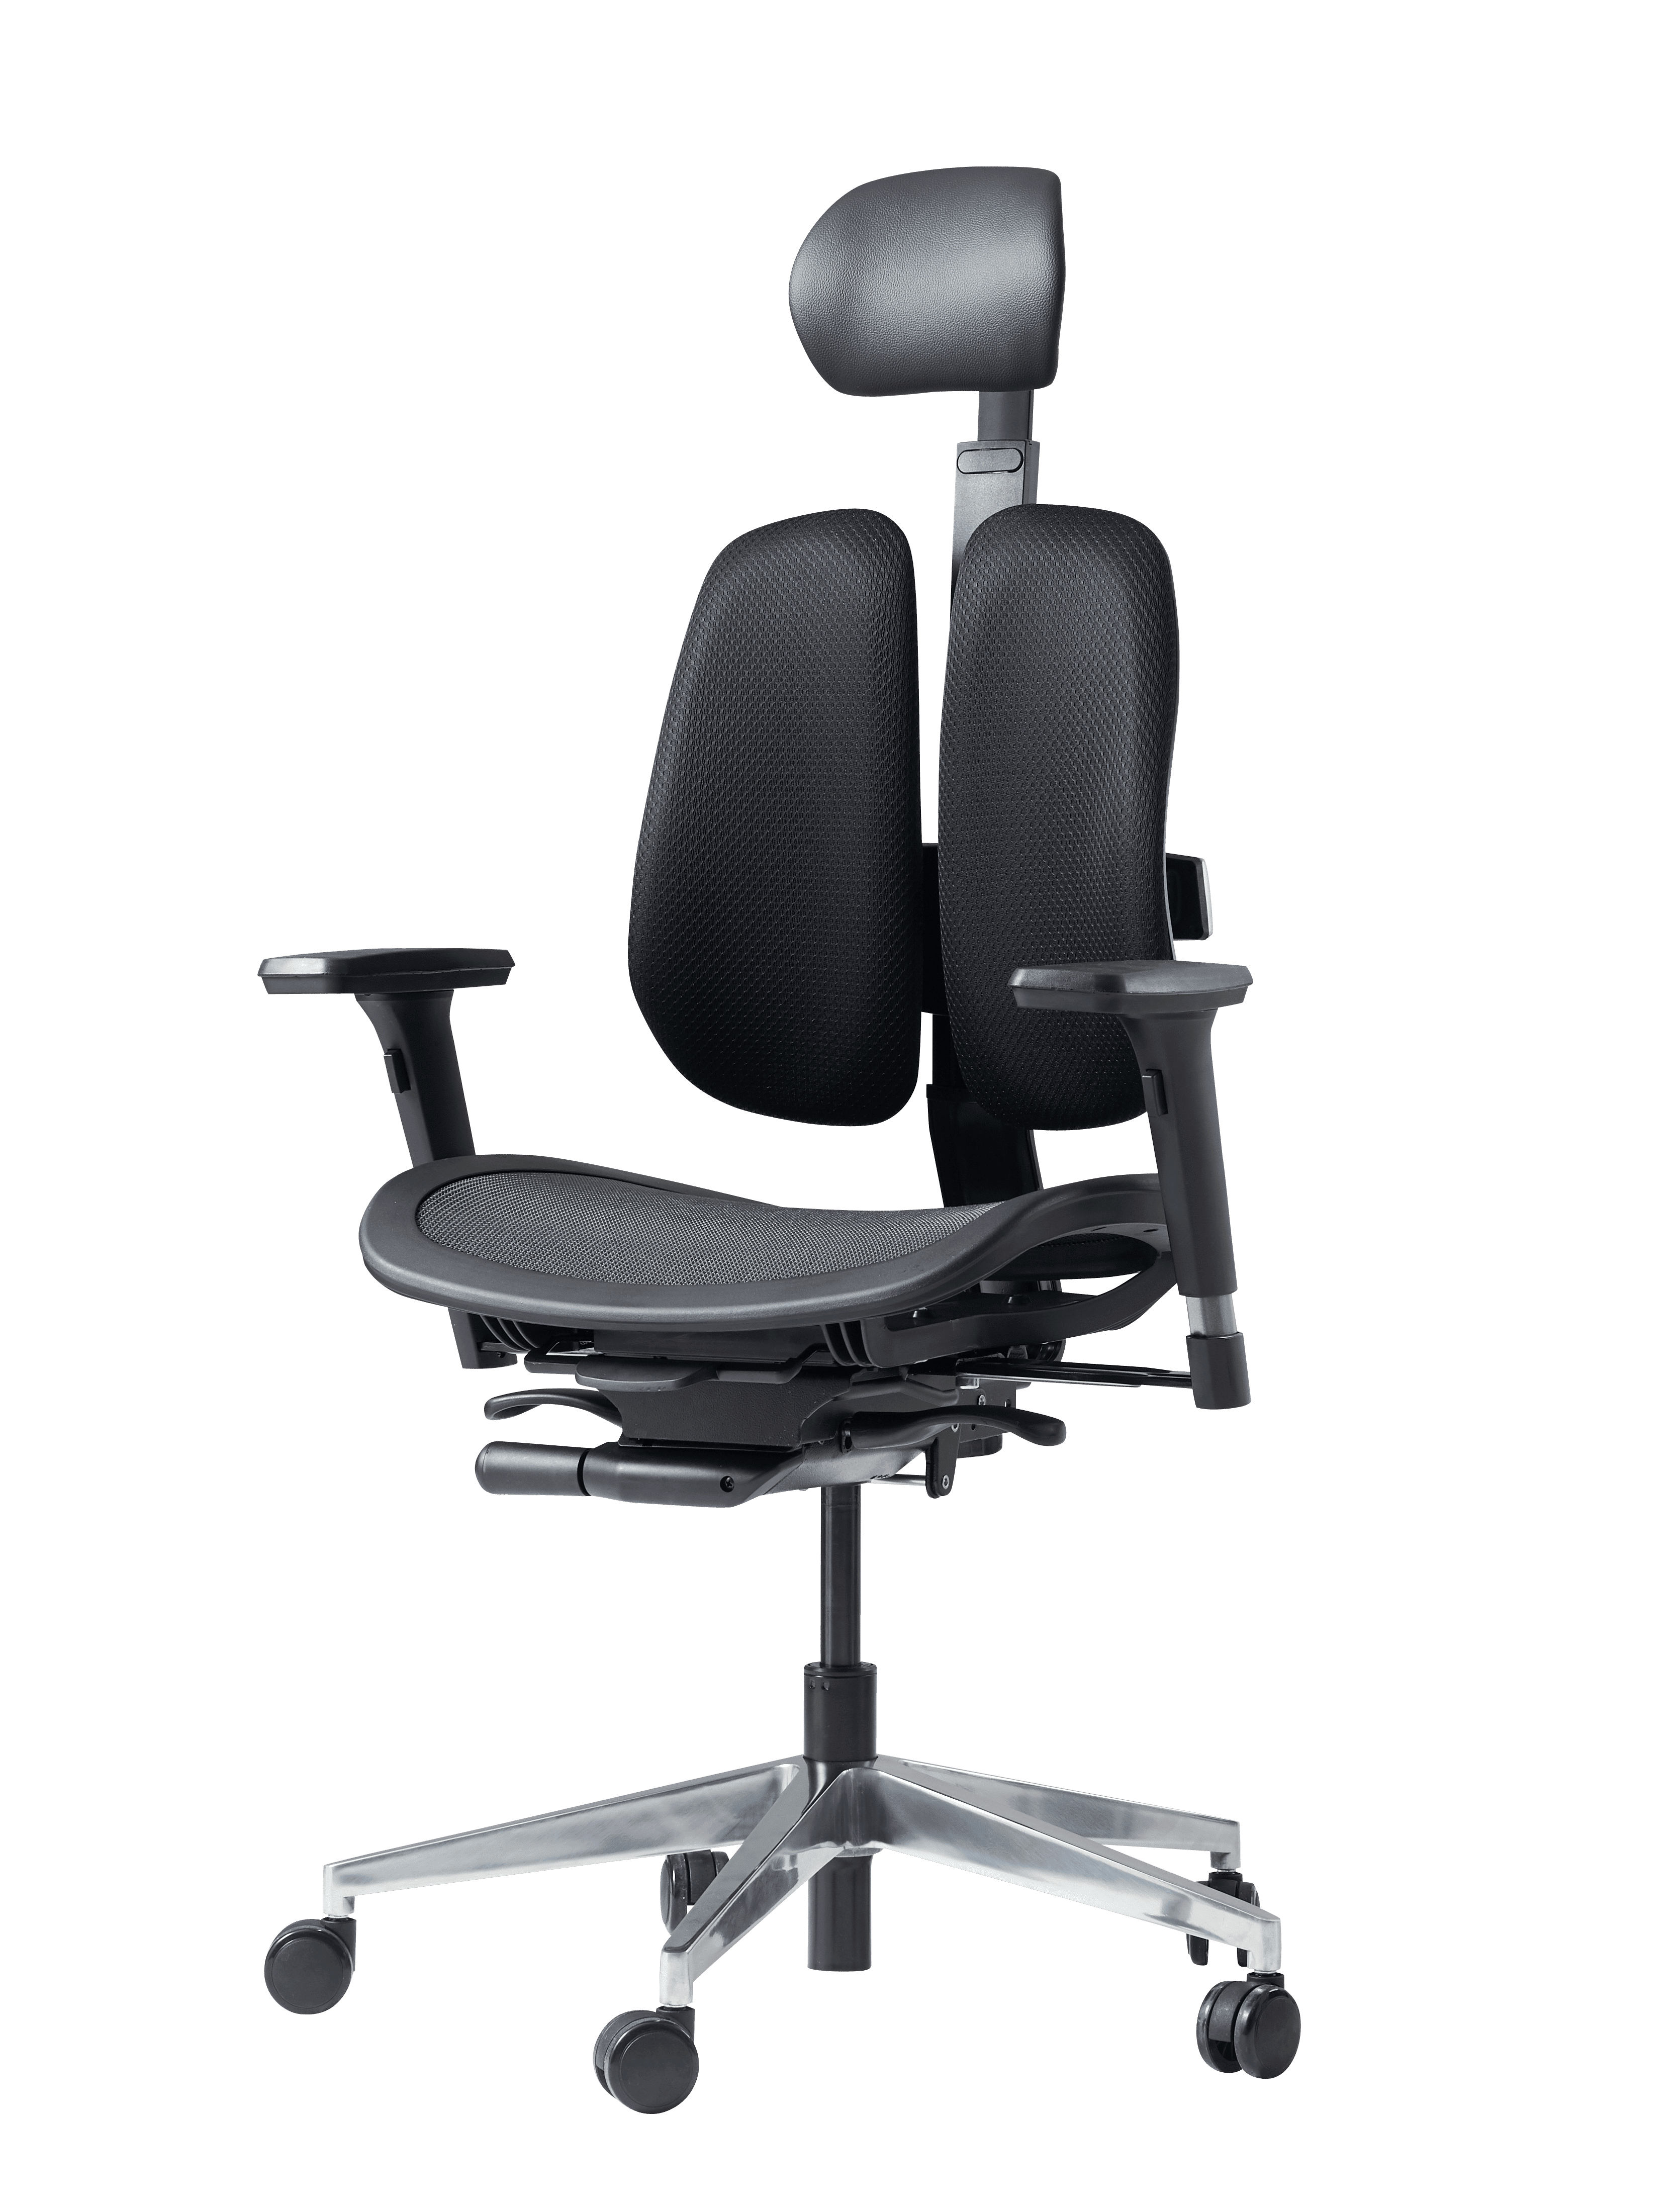 The Best Office Chair for Lower Back Pain